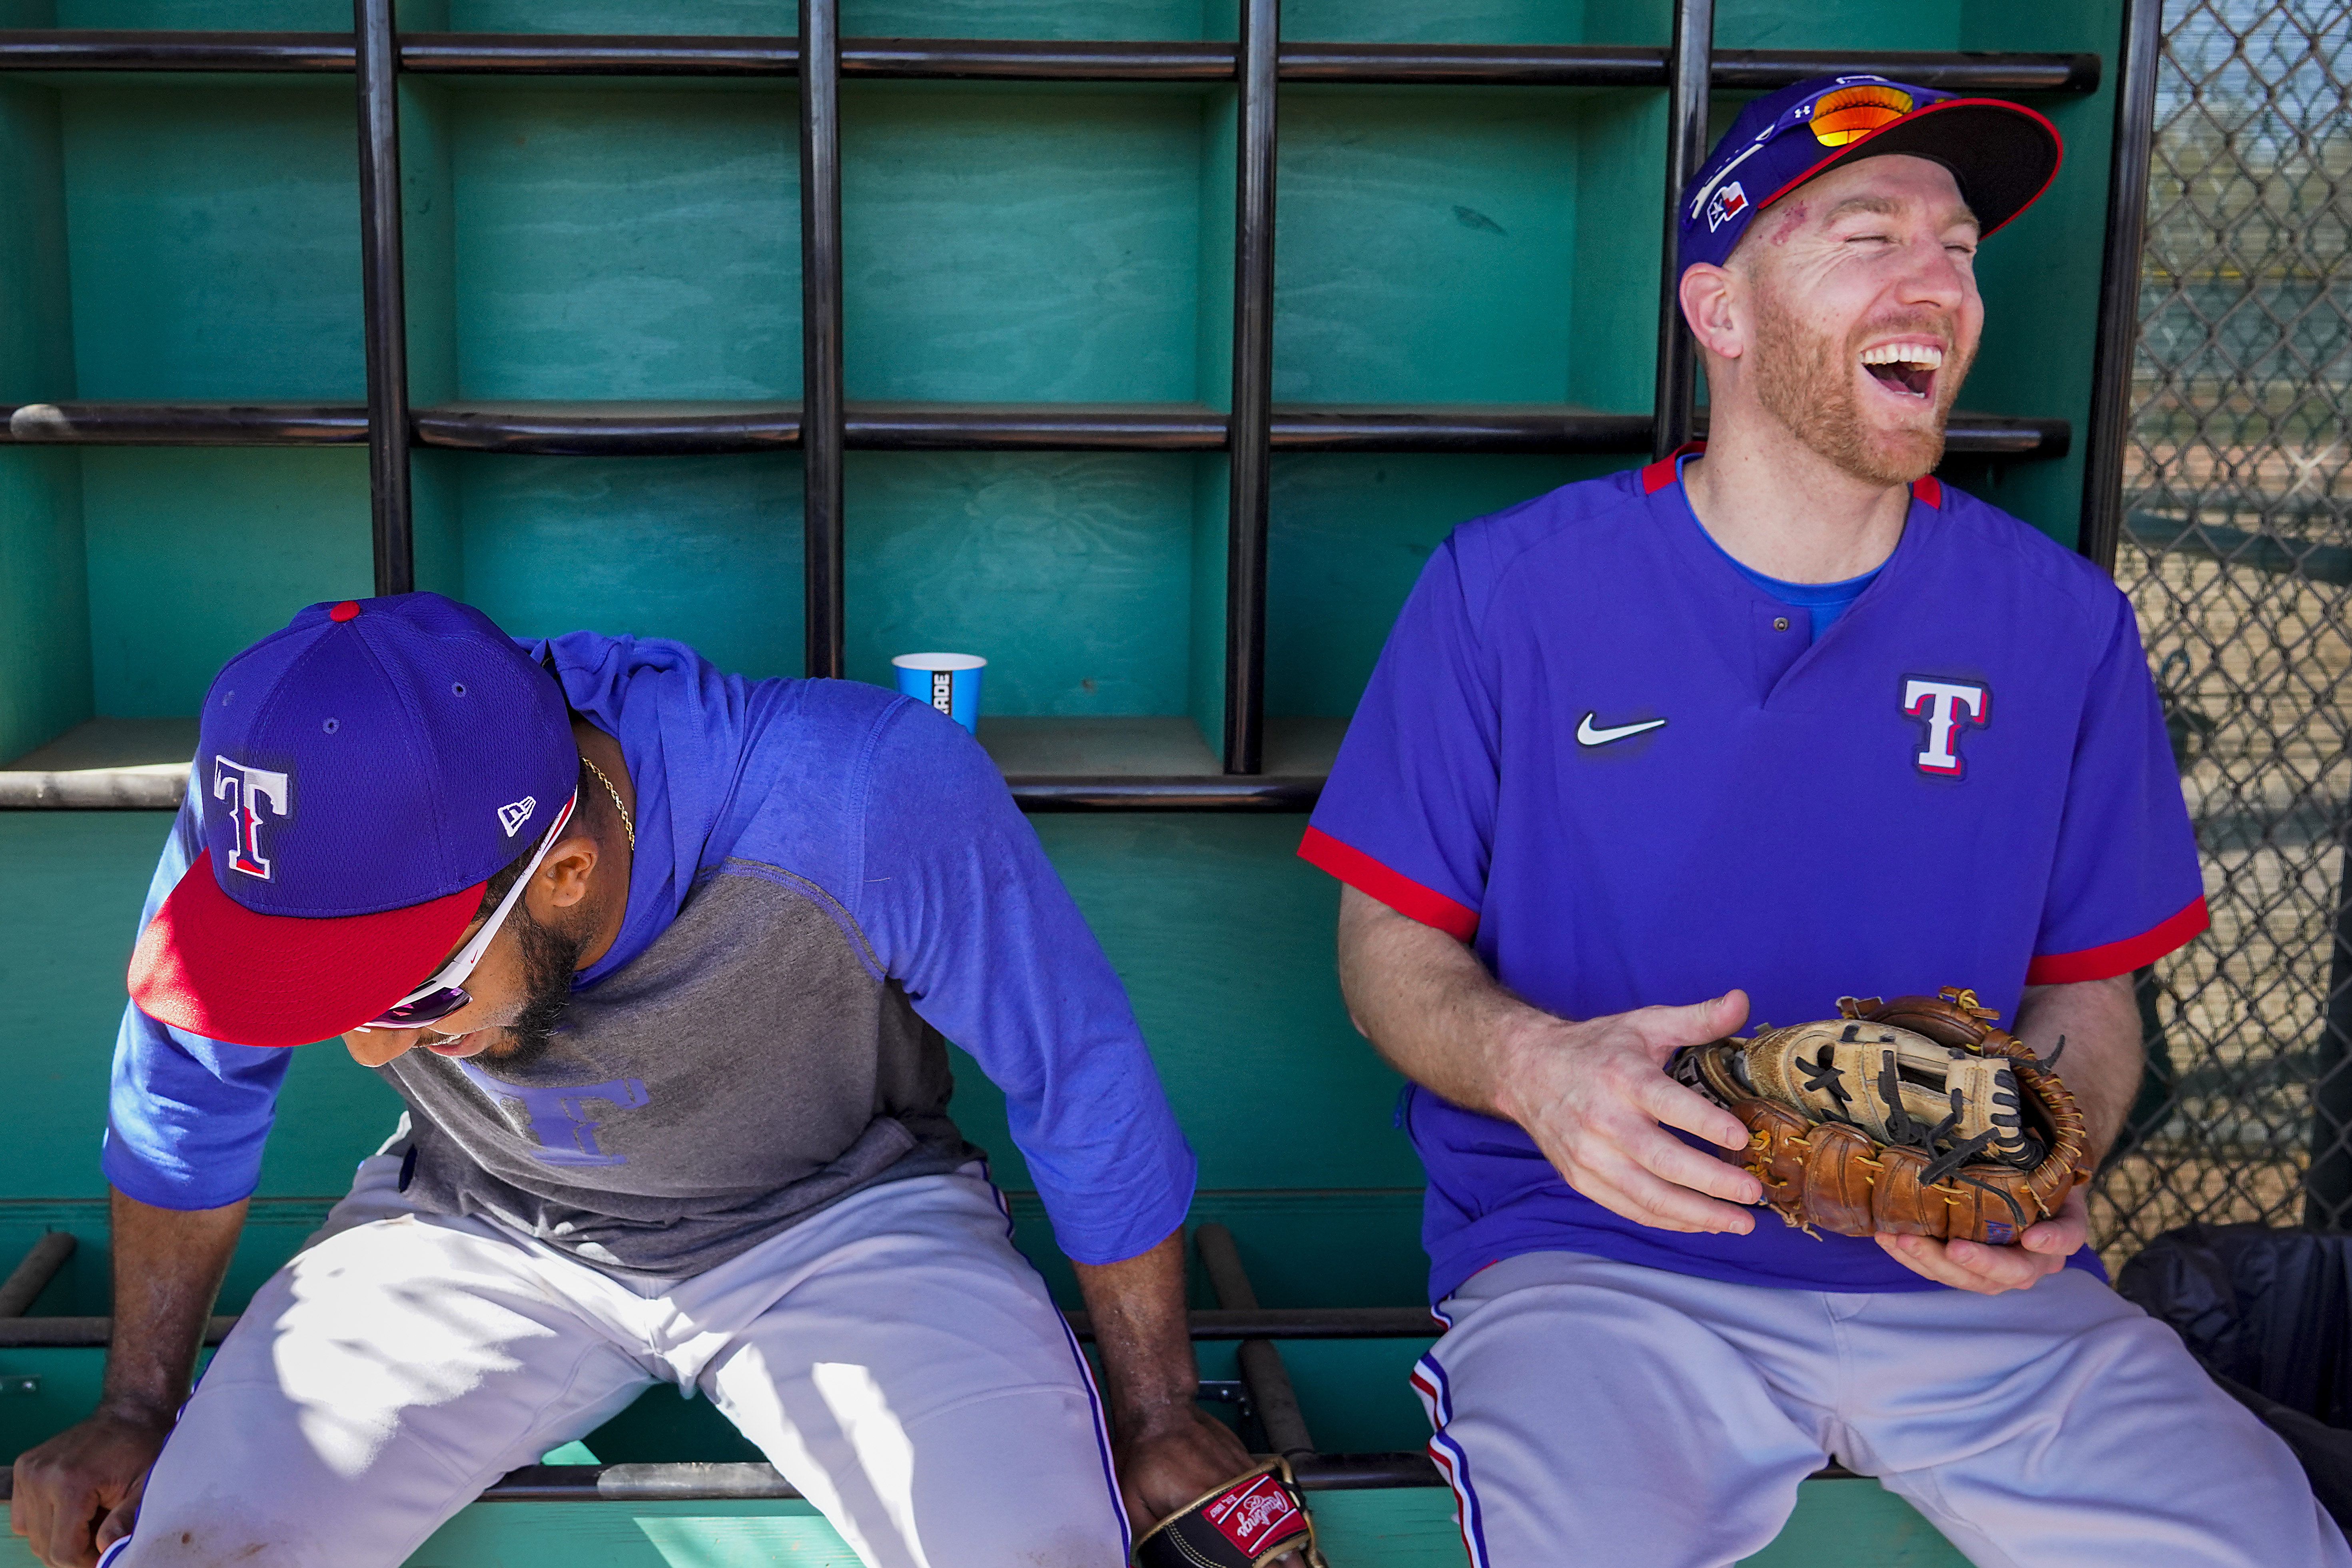 Rangers infielder Todd Frazier found unique way to take batting practice  with extra precautions